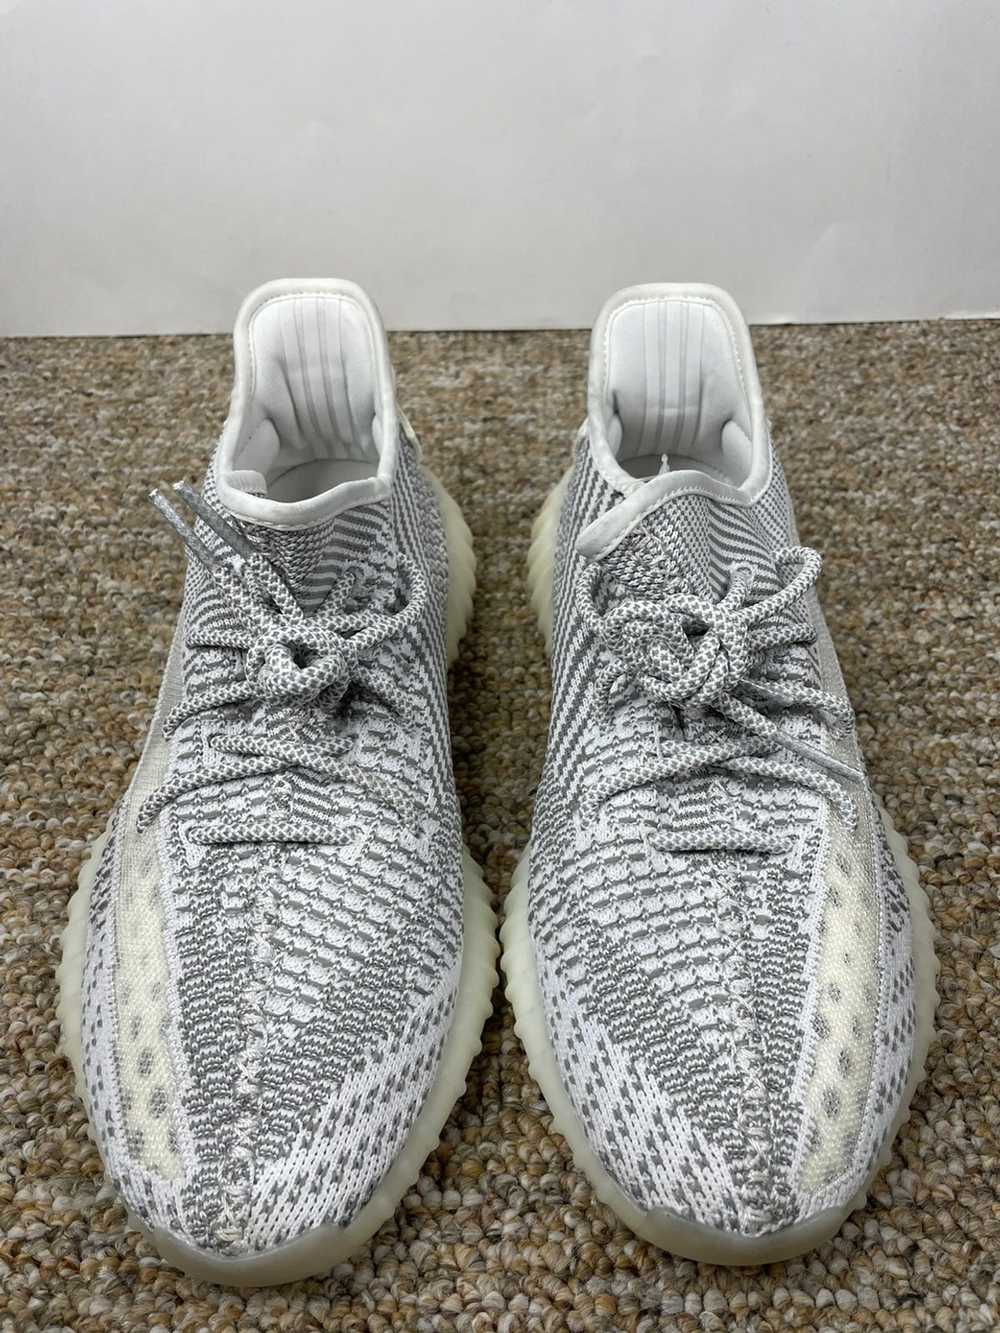 Adidas Yeezy Boost 350 V2 Static Non Reflective - image 4